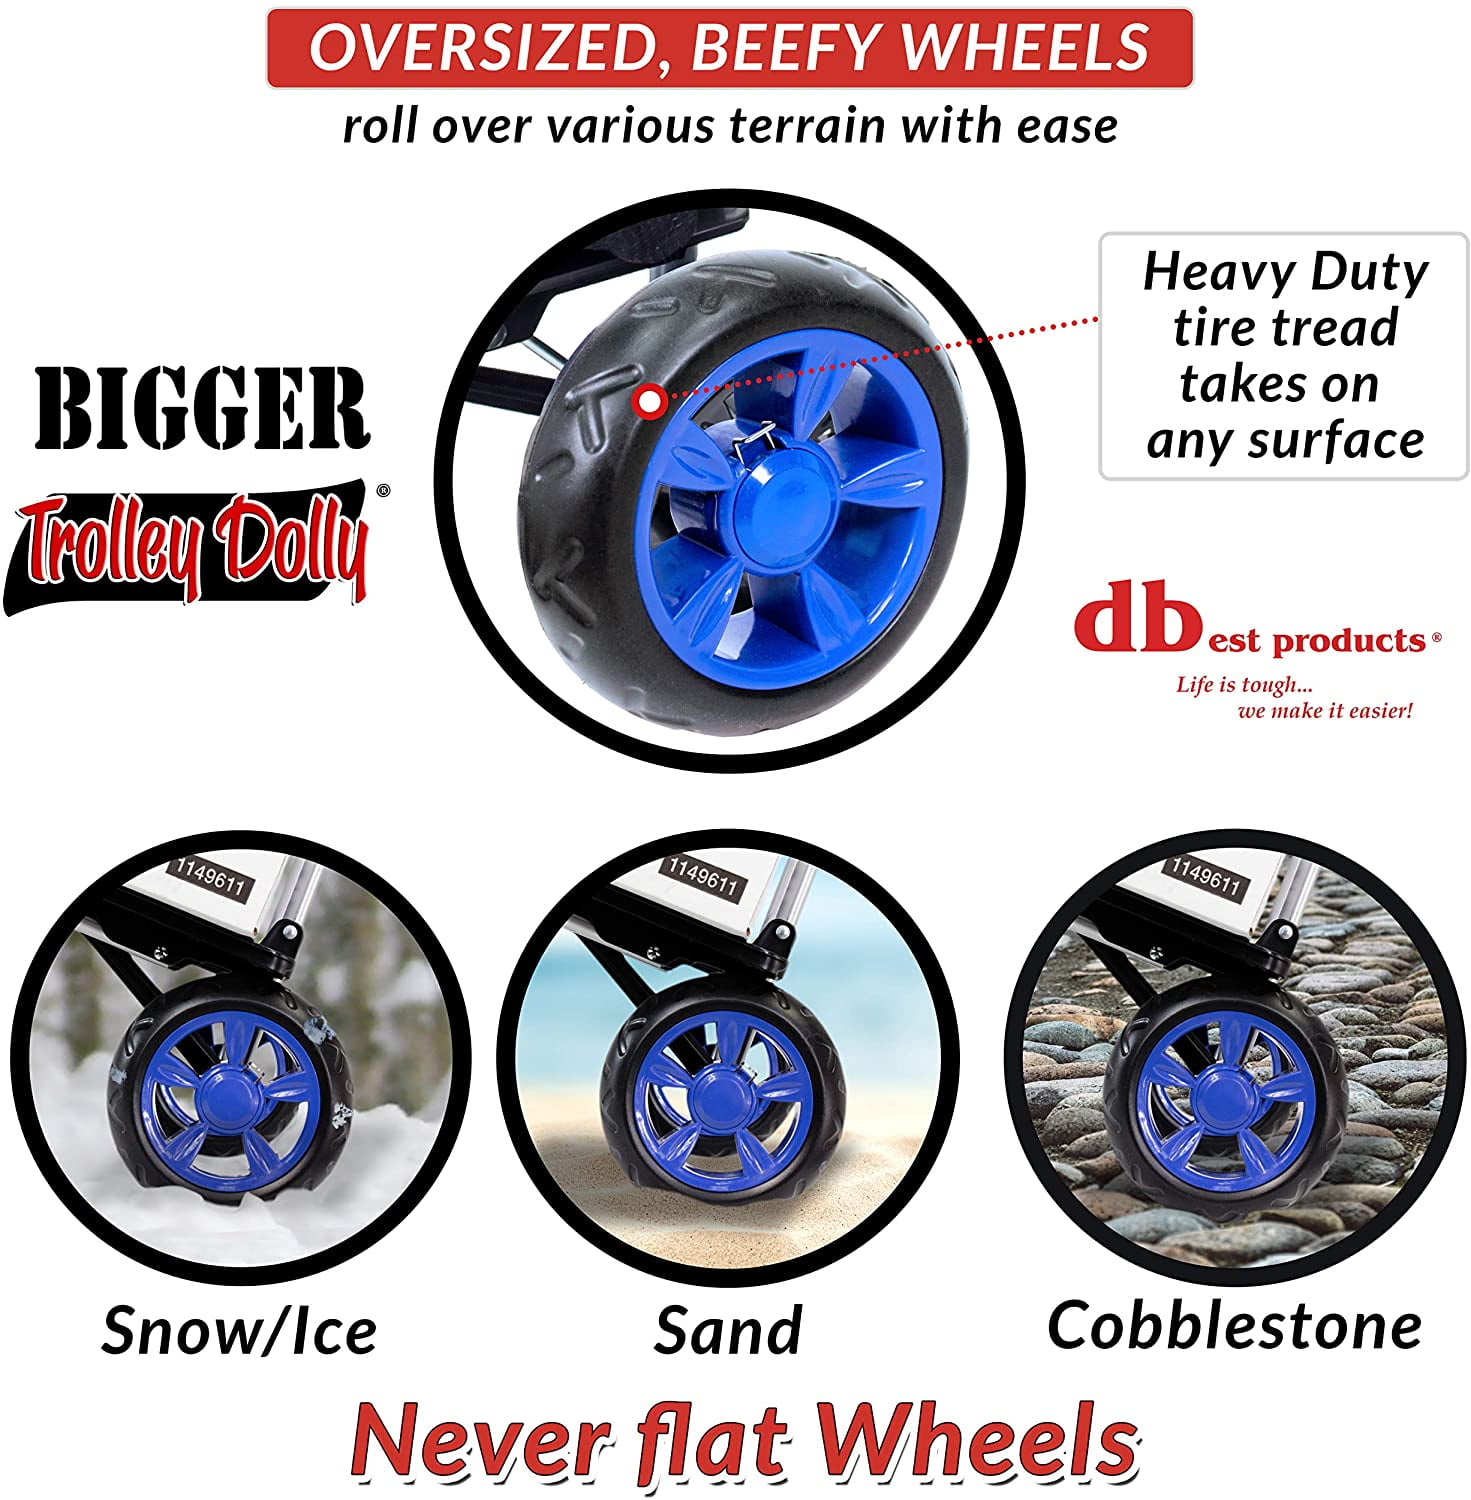 dbest products DBEST-01-560 Bigger Foldable Collapsible Cart Trolley Dolly Blue 